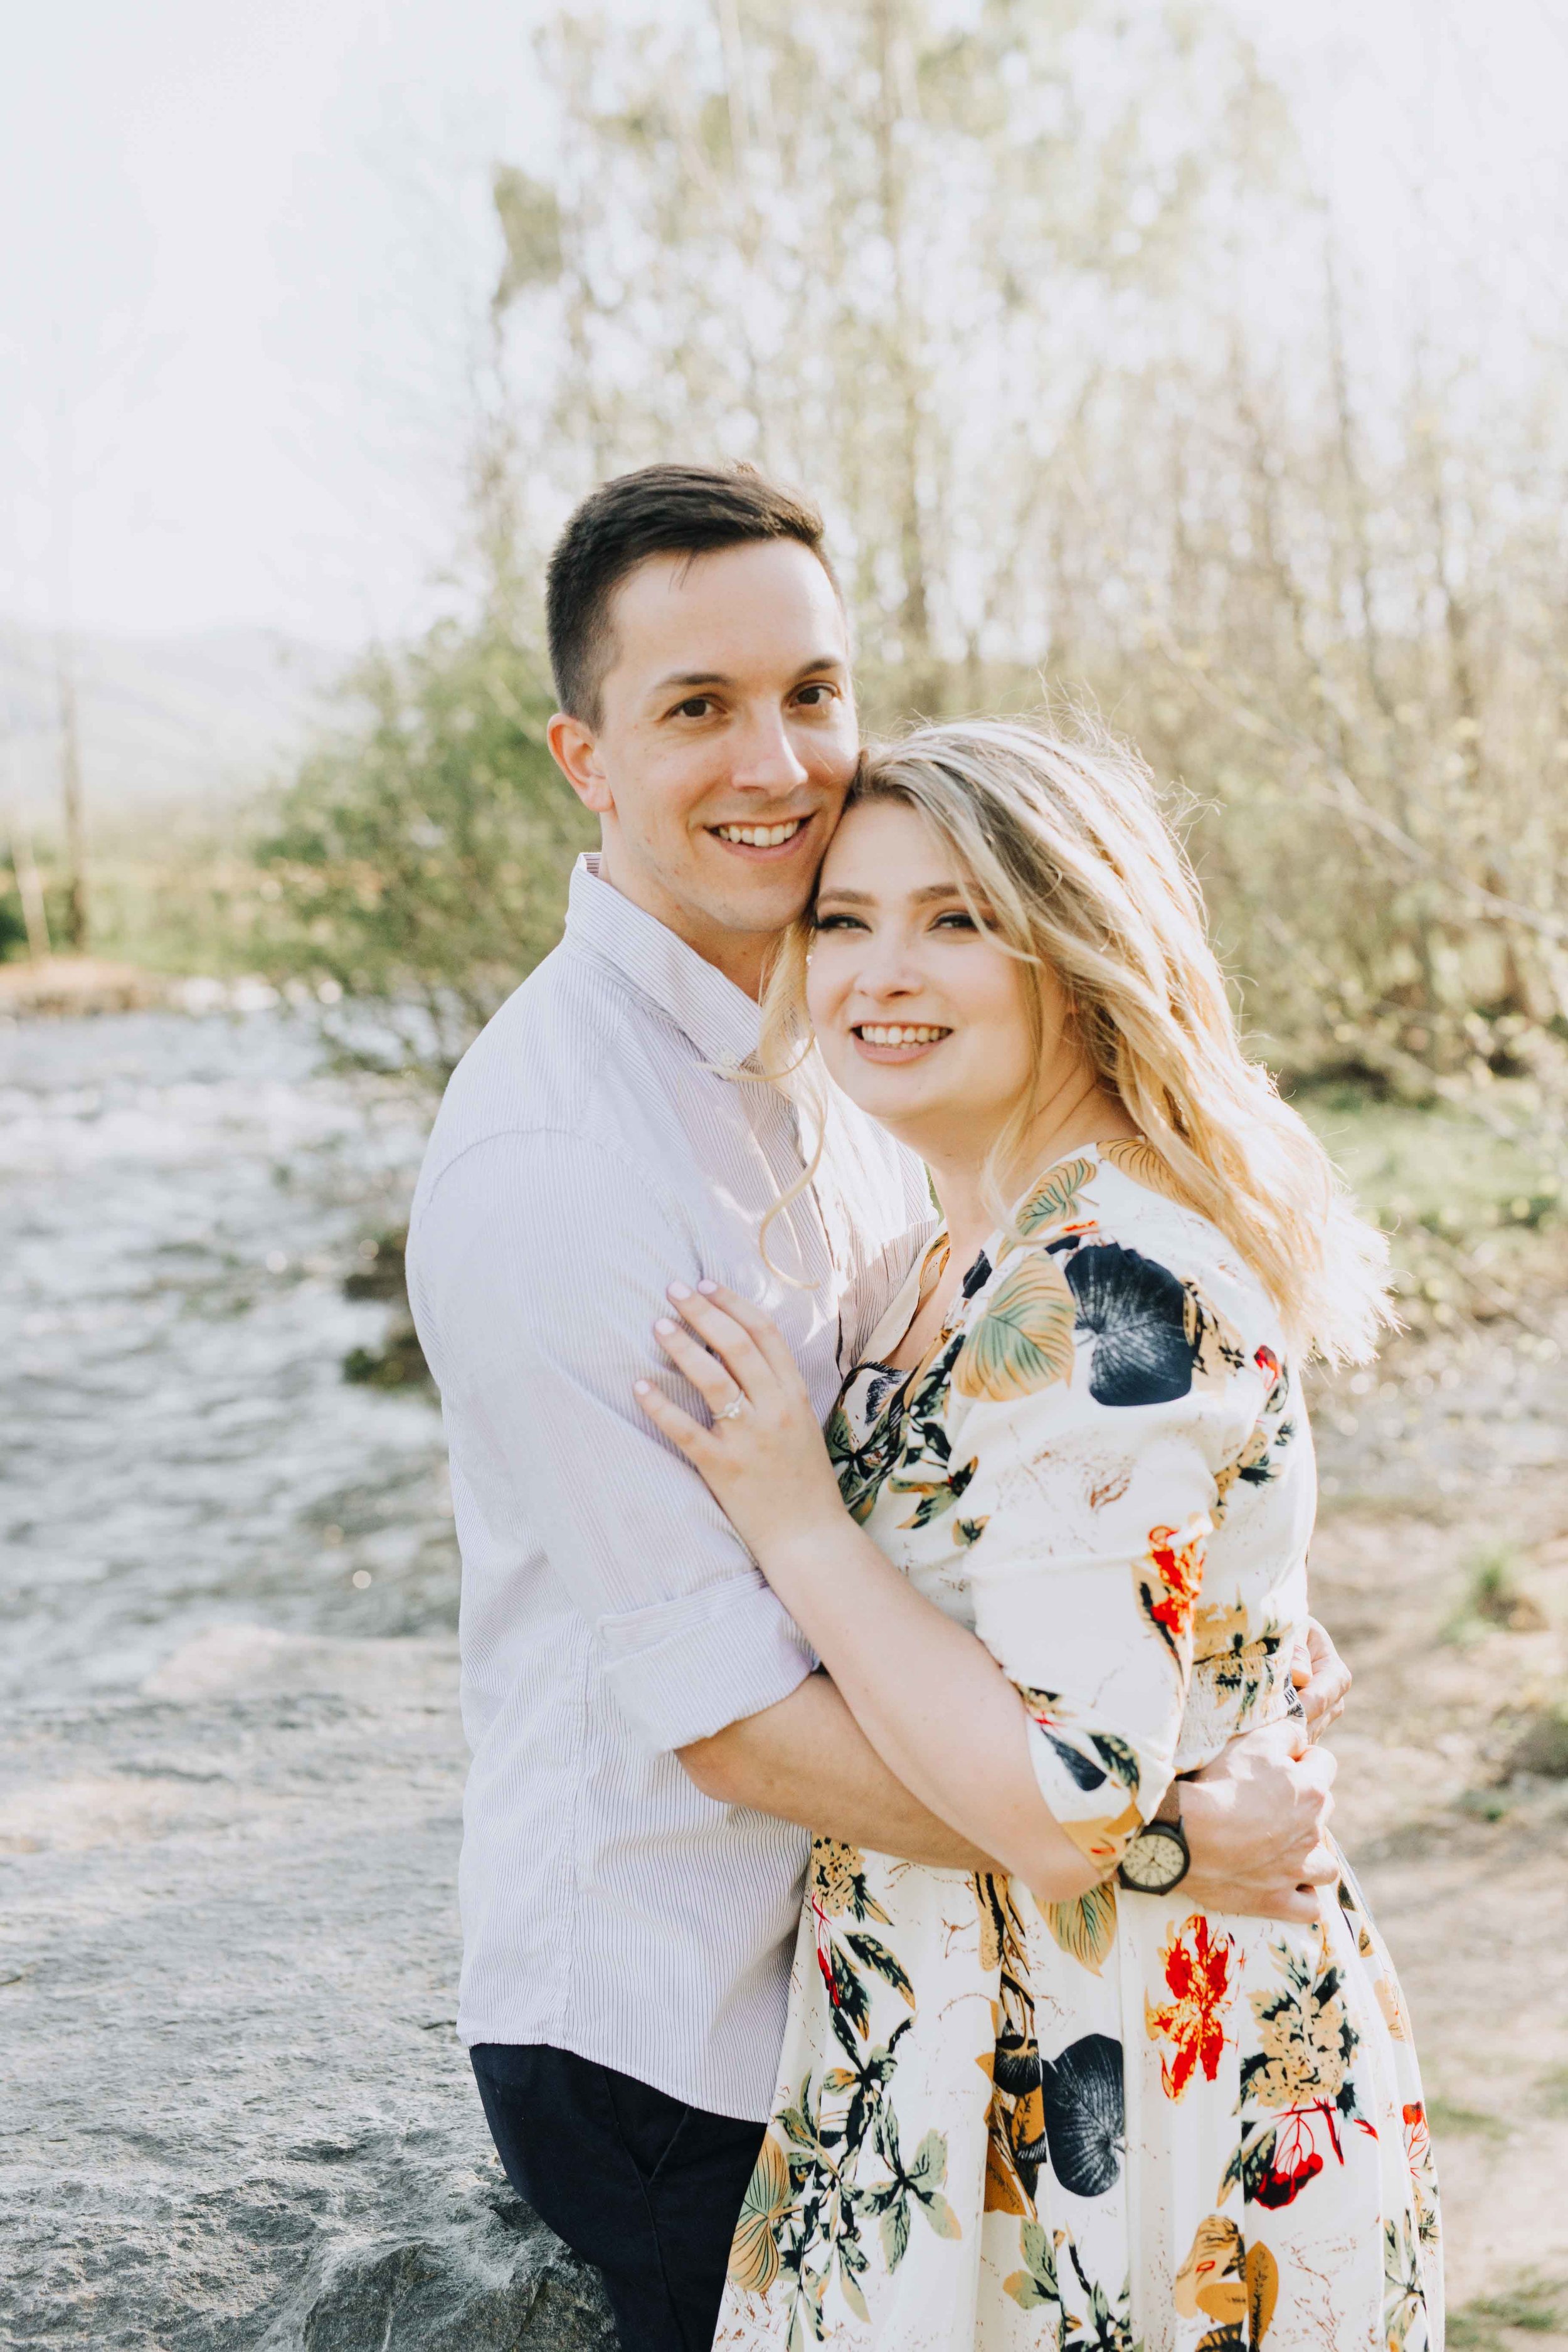 Jacqueline-Waters-Photography-Floral-Dress-Engagement-Virginia-Mountains- (126).jpg